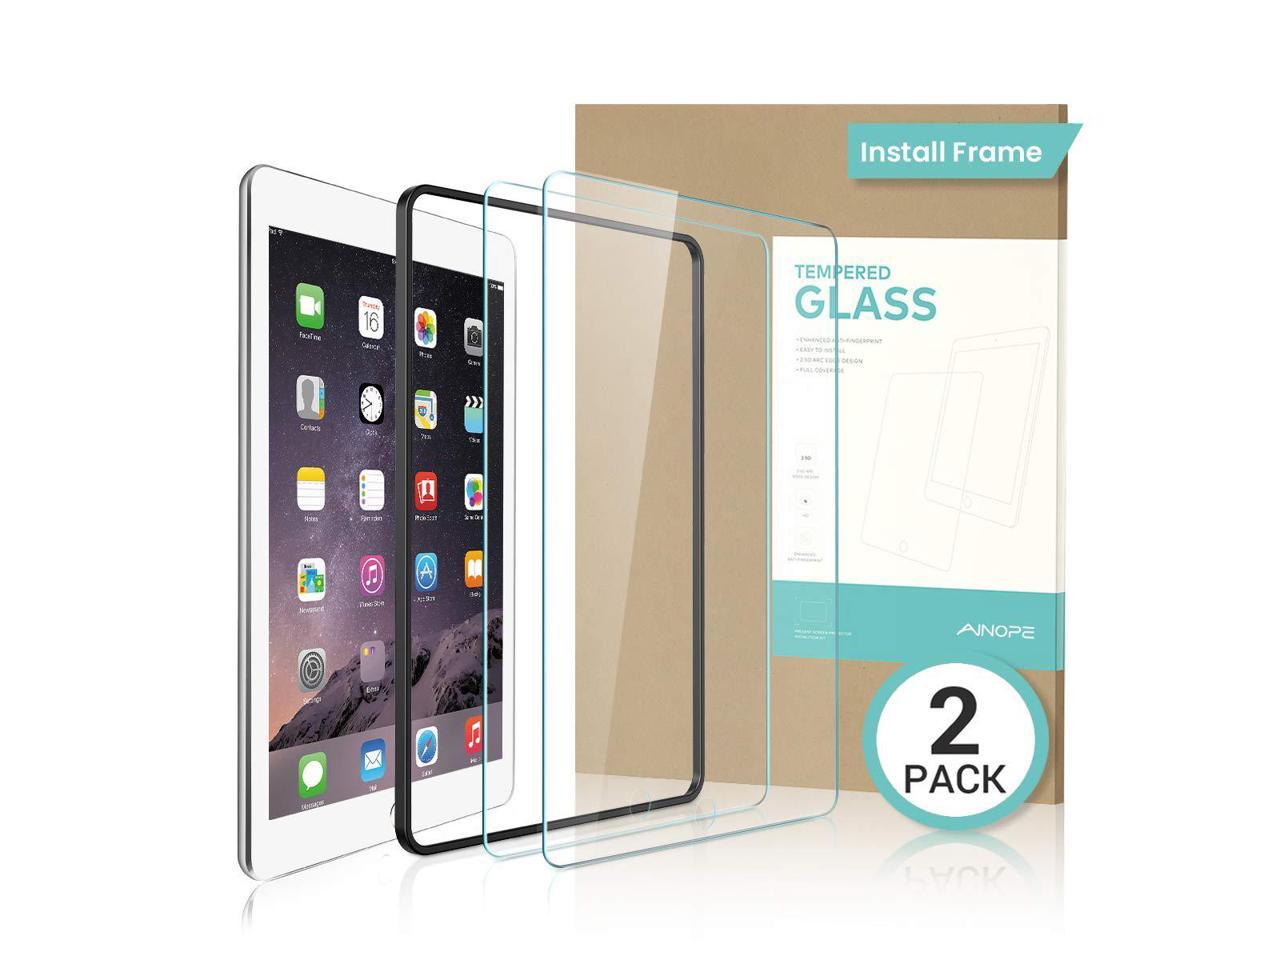 100% Genuine Tempered Glass Screen Protector cover For NEW APPLE iPad 9.7" 2017 